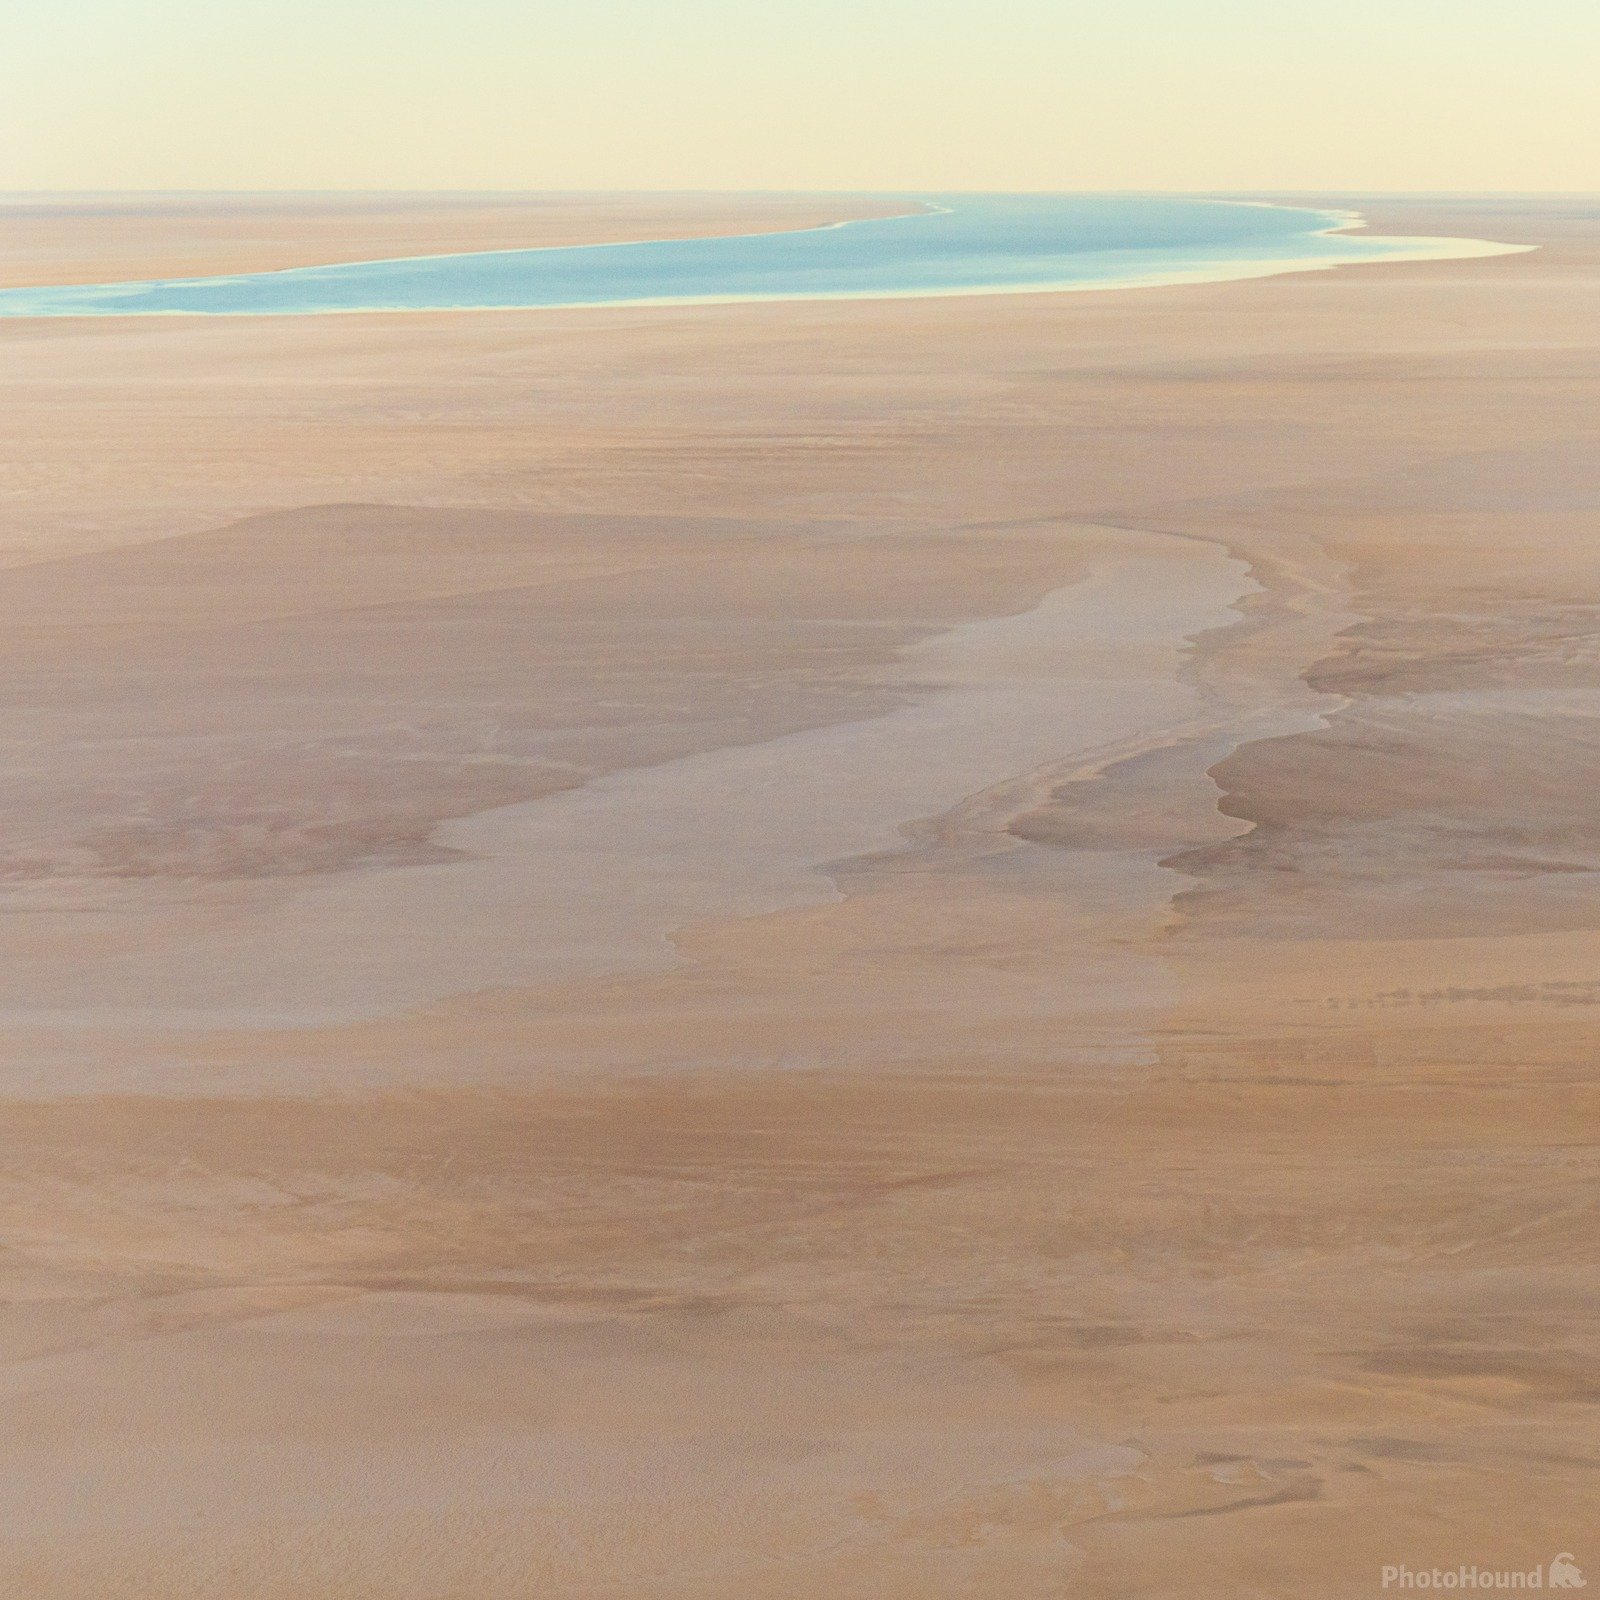 Image of Lake Eyre - Aerial Photography by Ralph McConaghy